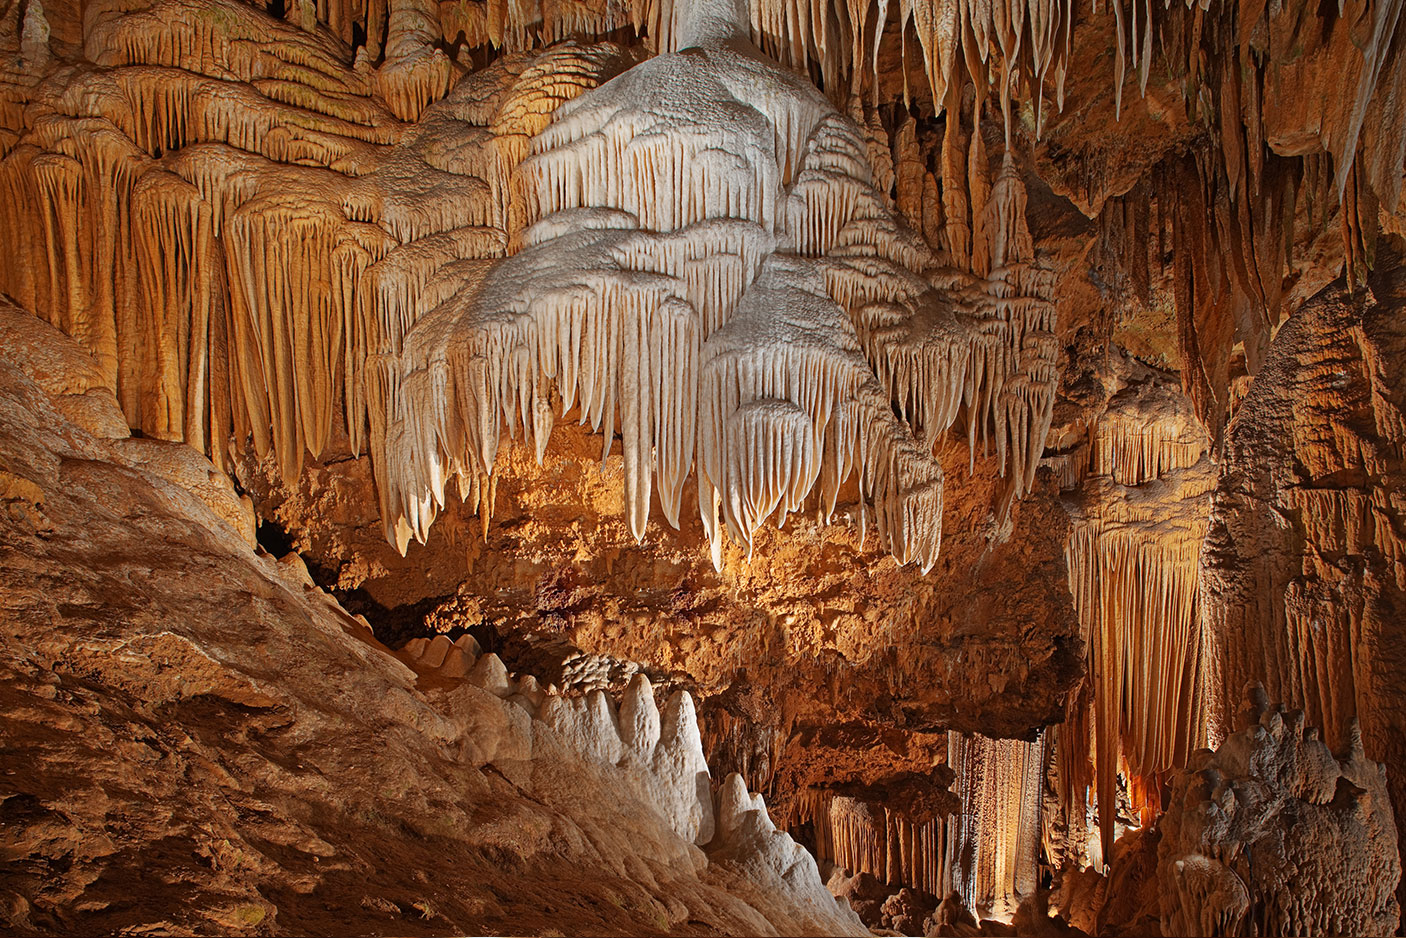 Formations in the cave